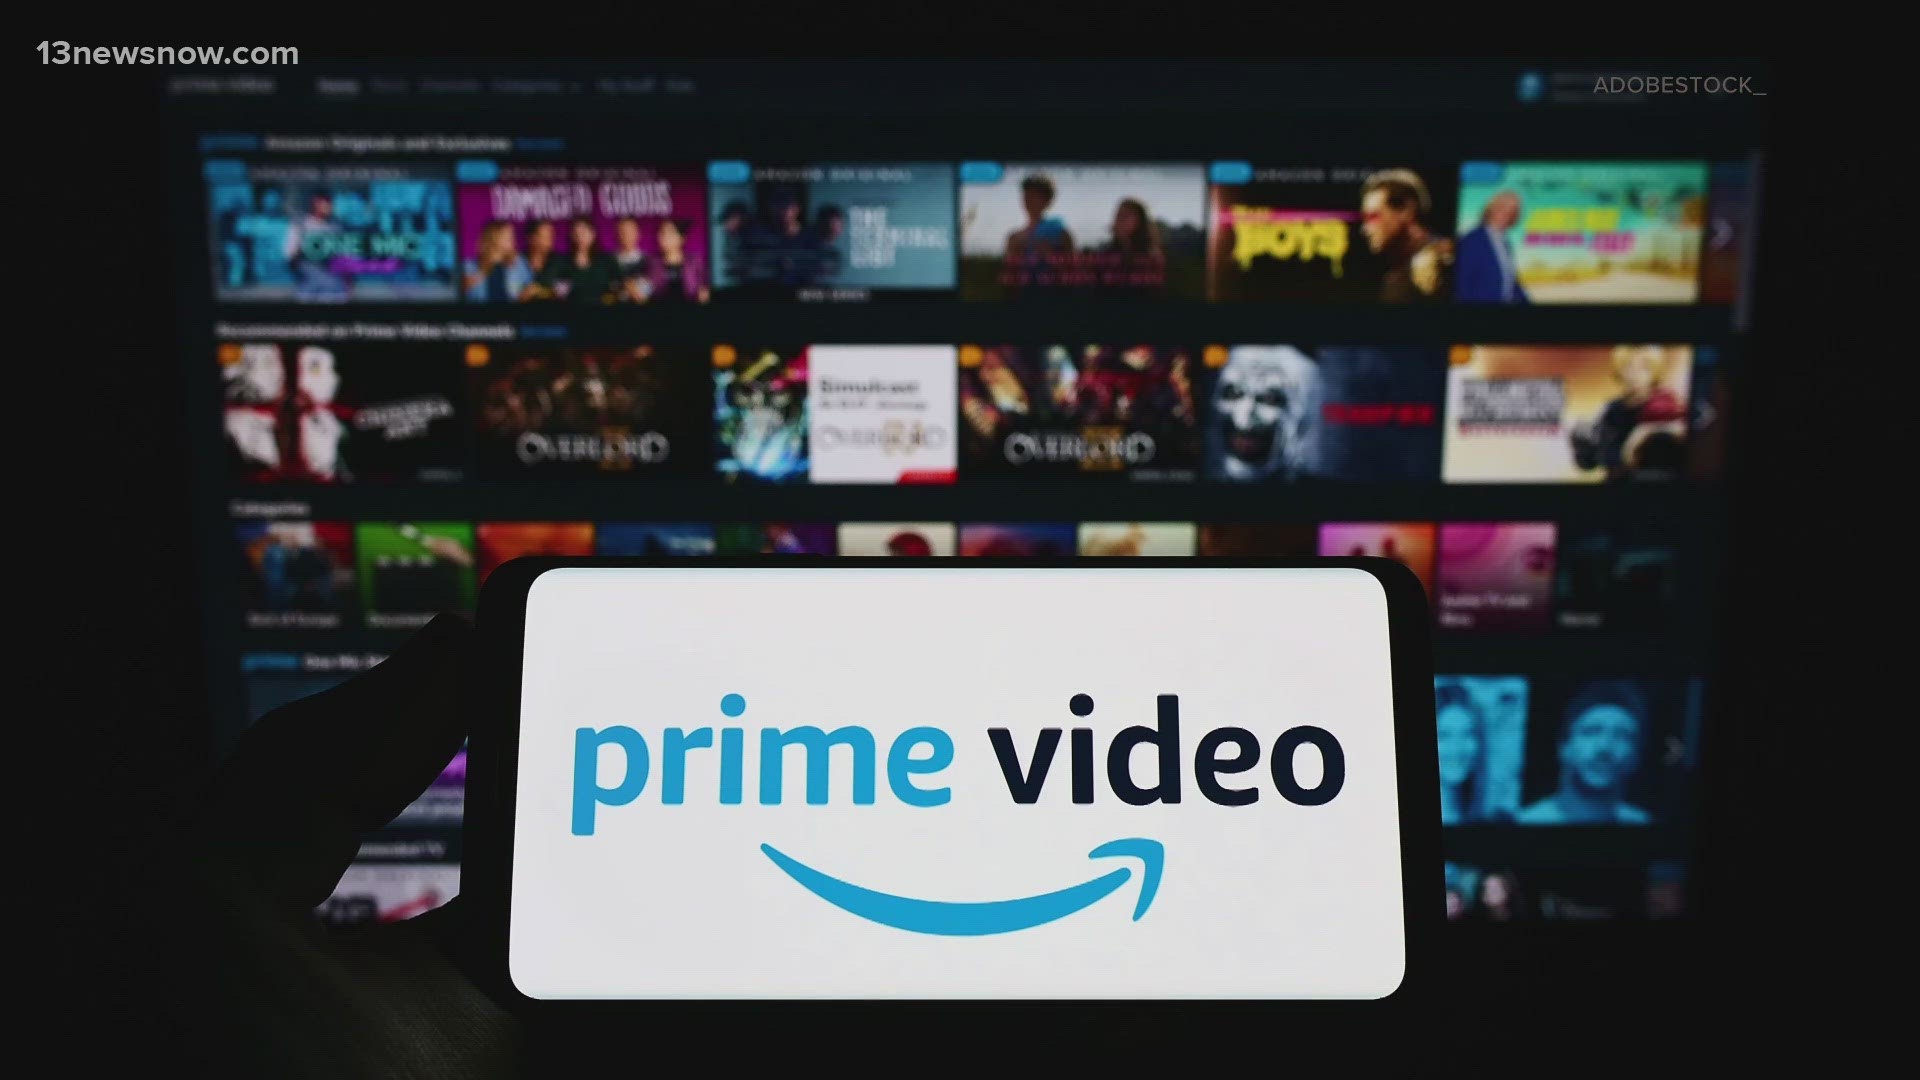 Prime Video introducing ads on January 29